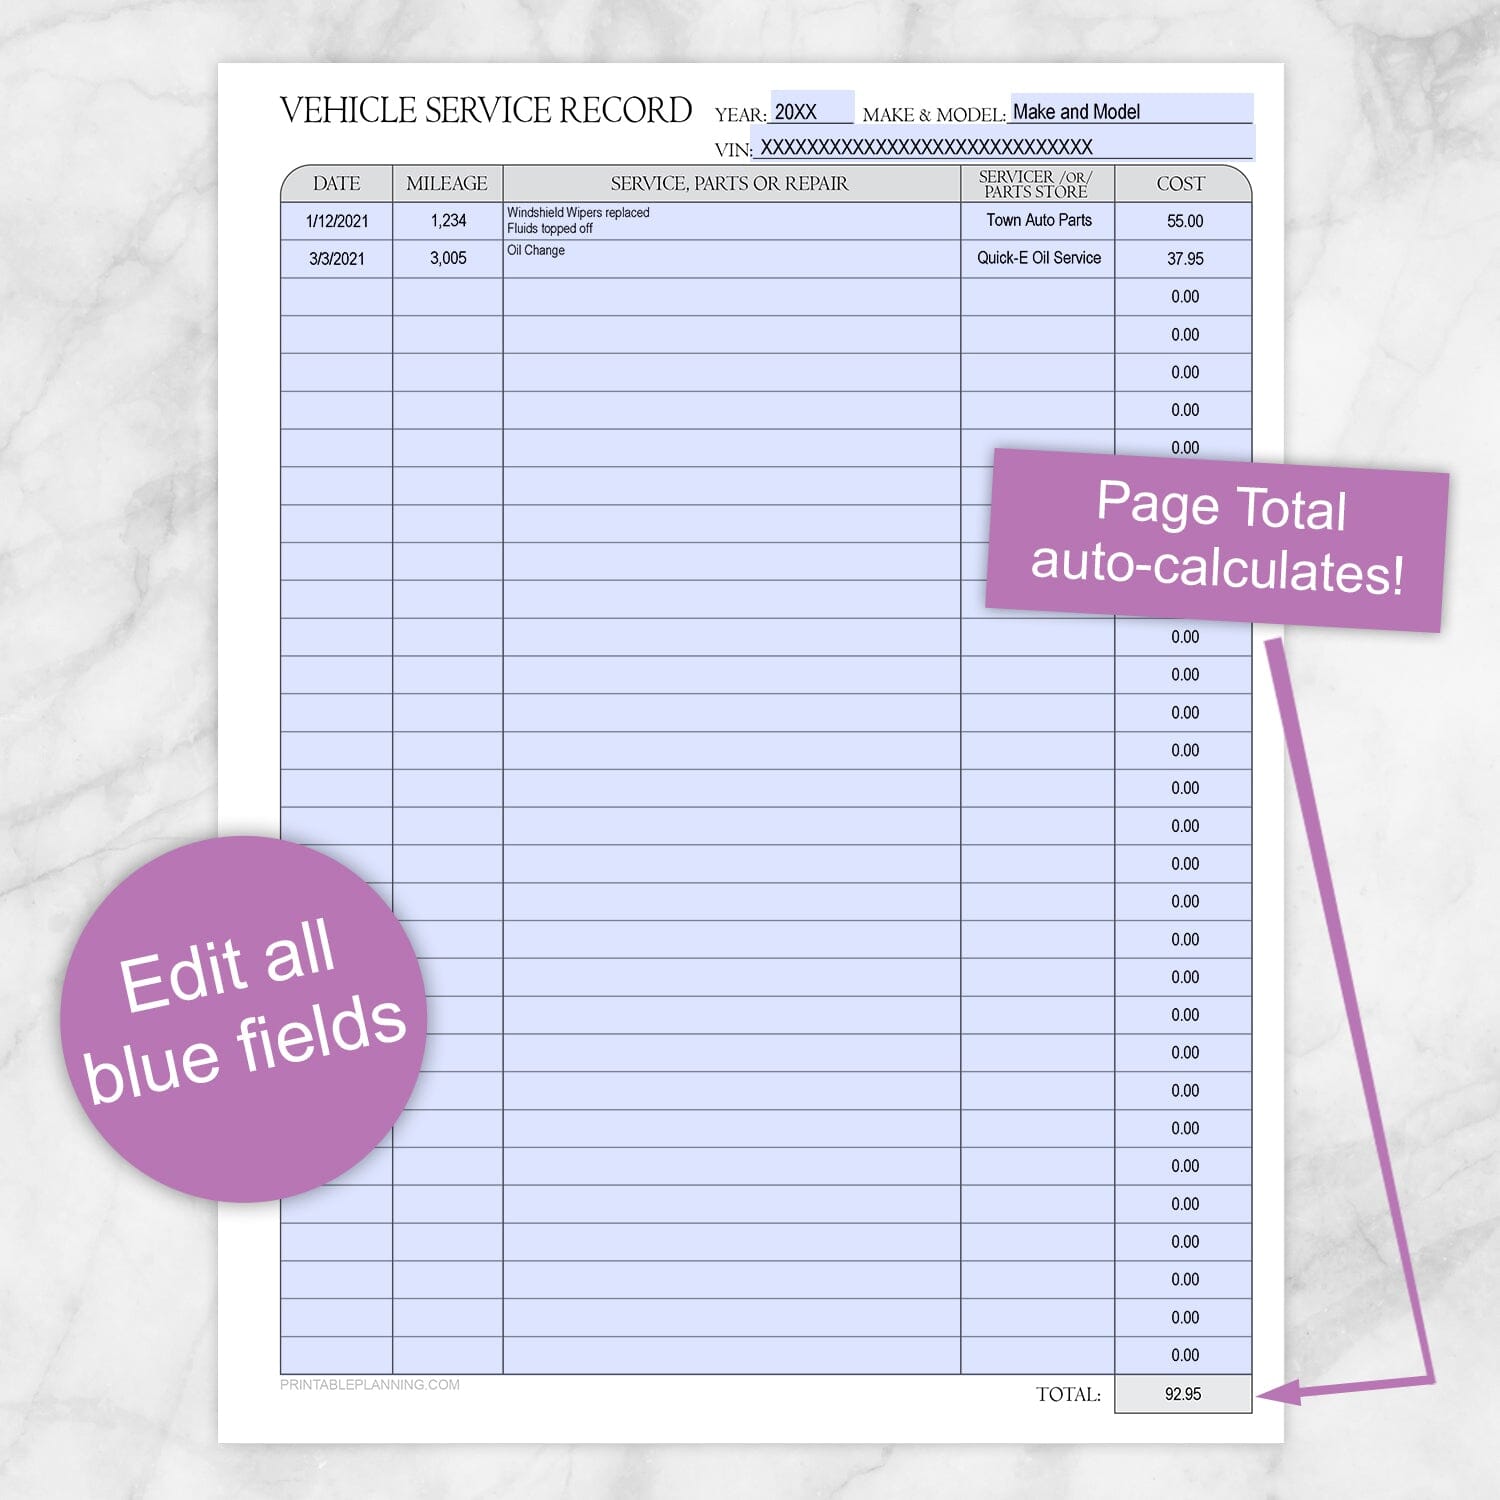 Printable Vehicle Service Record with Auto-Calculating Total (editable, edit all blue fields and total auto-calculates) at Printable Planning